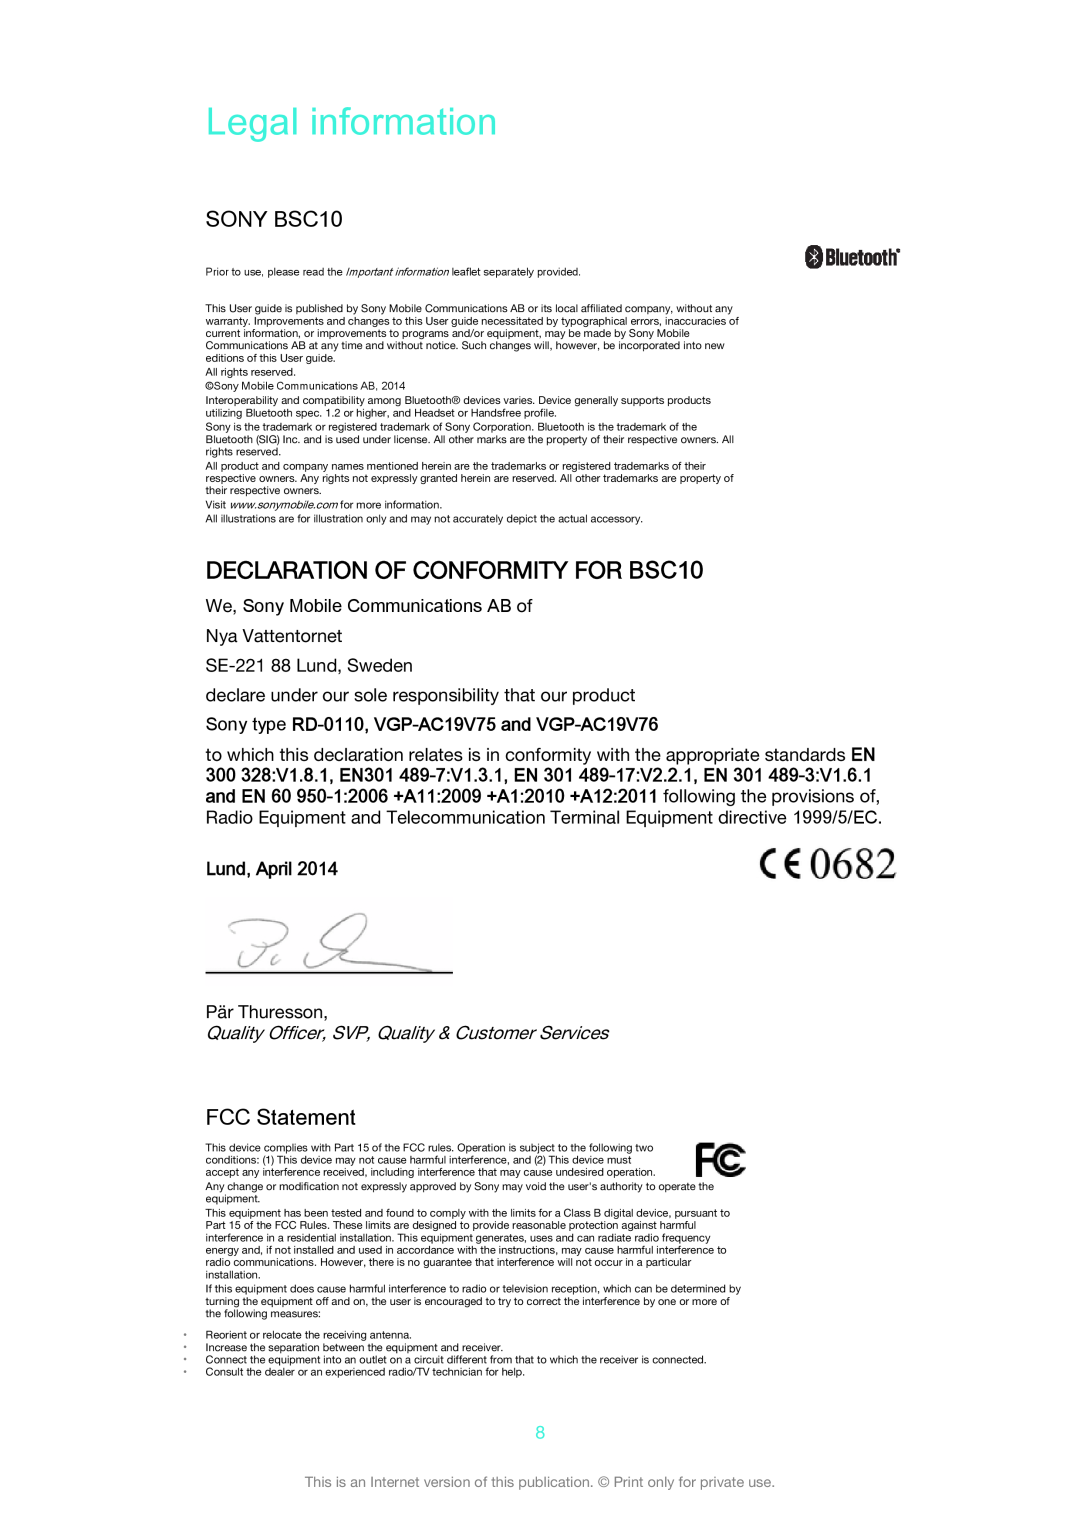 Sony manual Legal information, DECLARATION OF CONFORMITY FOR BSC10, SONY BSC10, FCC Statement, Lund, April 